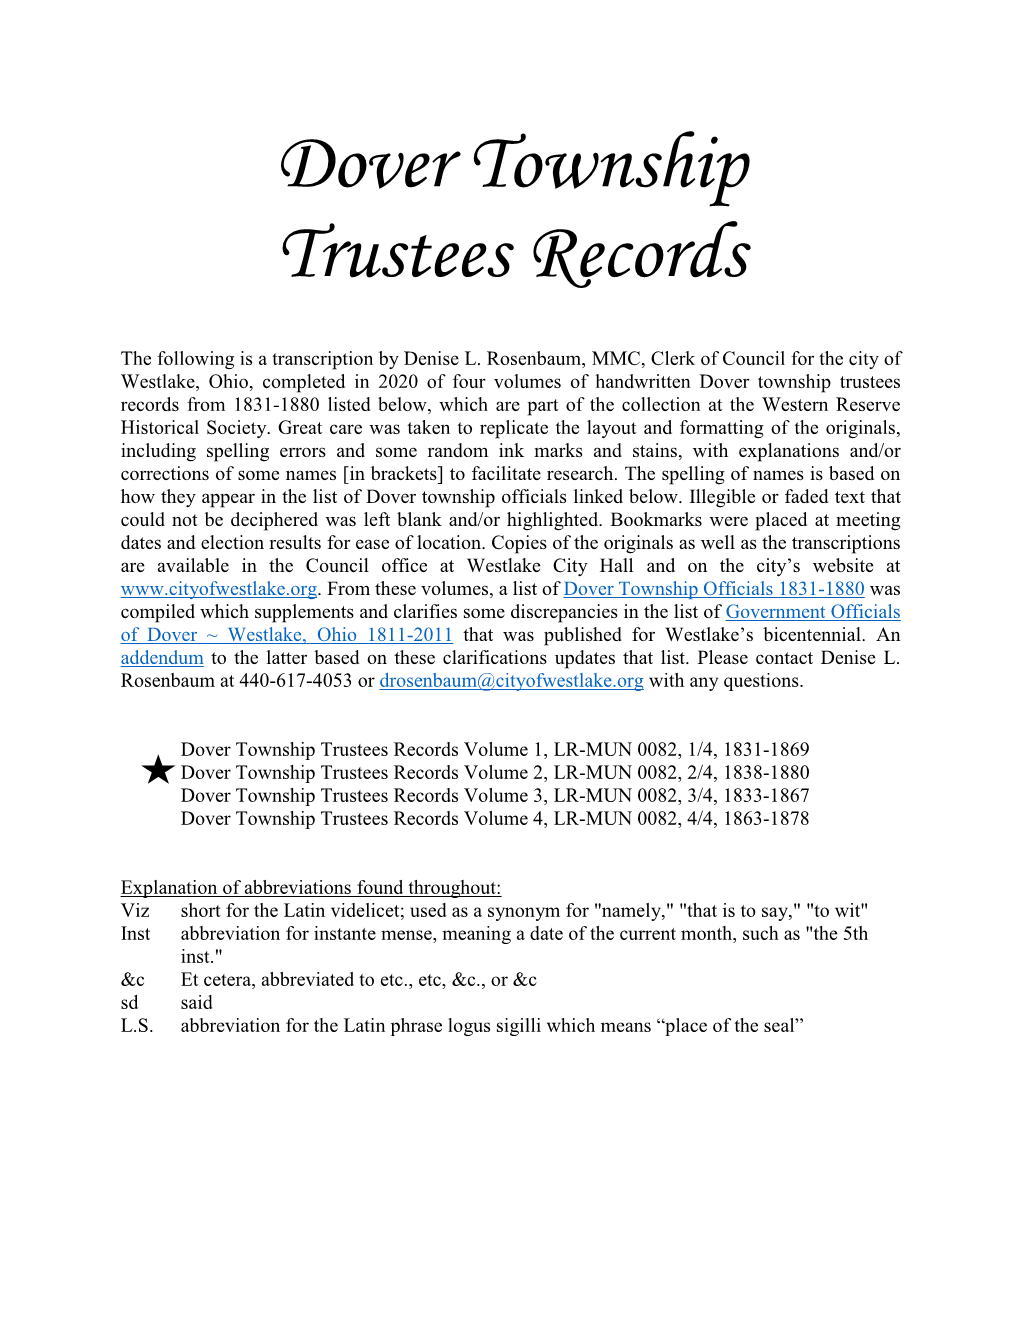 Dover Township Trustees Records